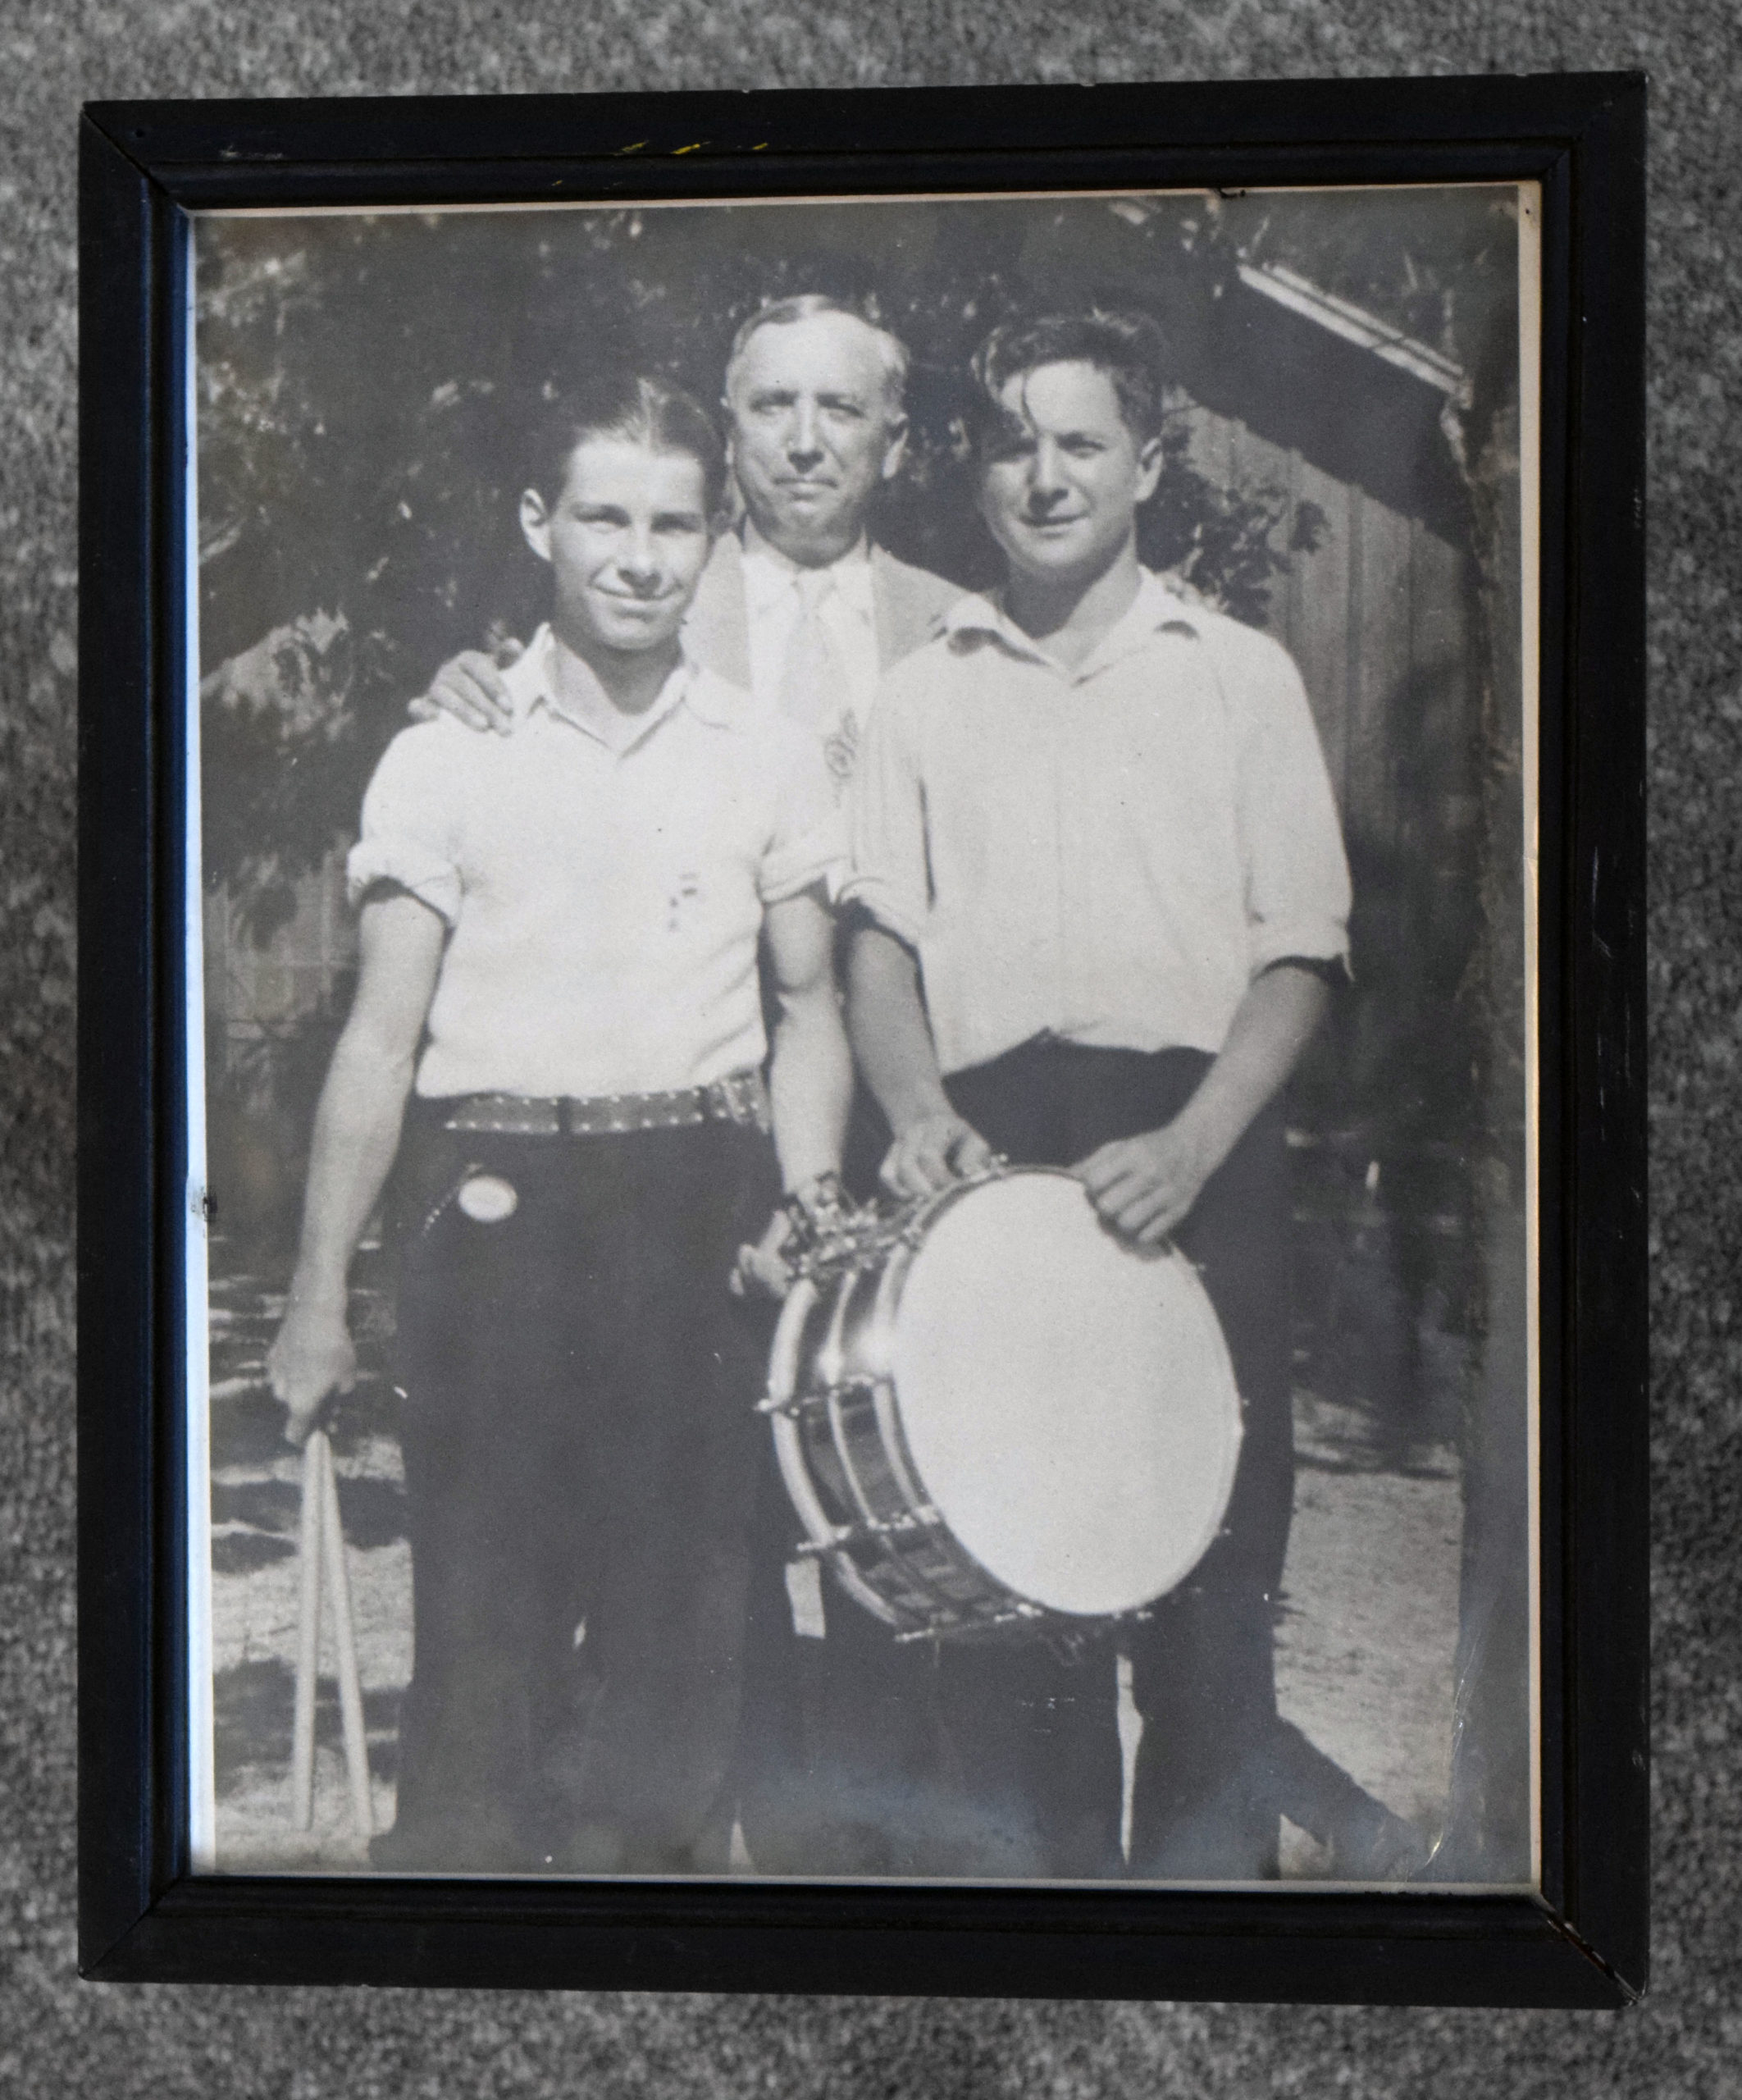 The young Fennell with his friend Bill Ludwig and Mr. Ludwig (Bill’s father), taken at the National Music Camp.